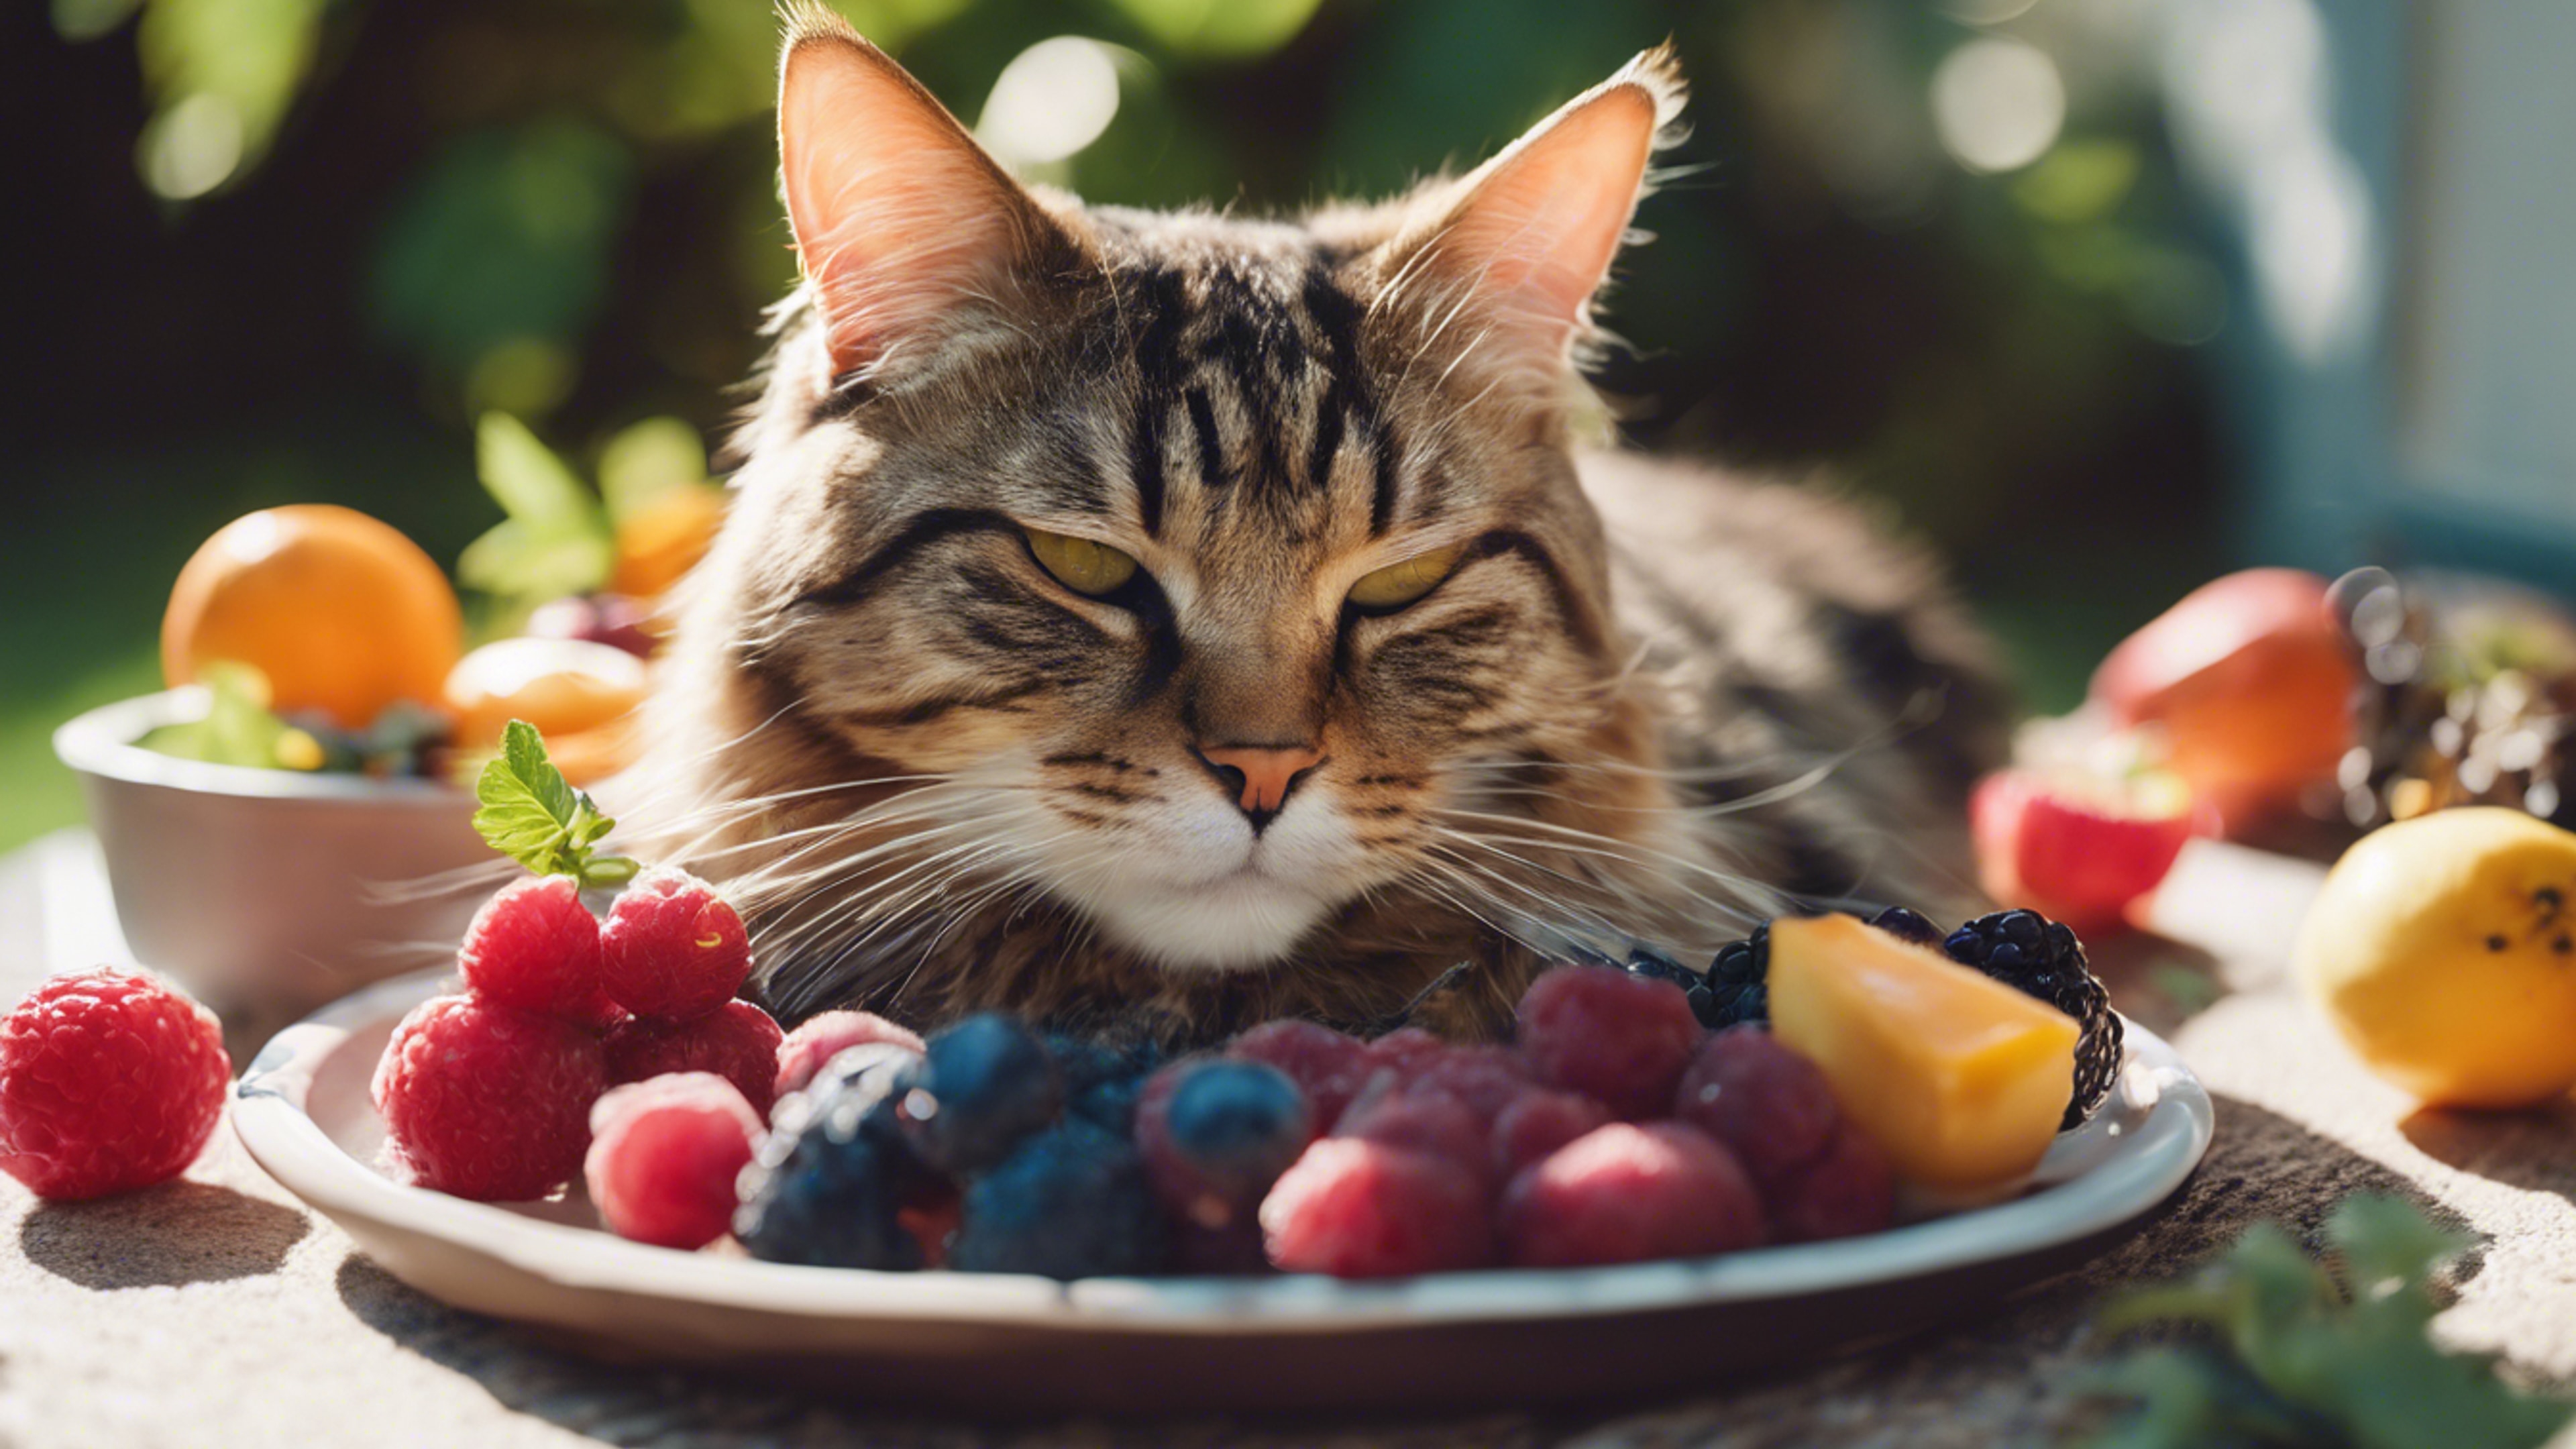 A sleepy Maine Coon cat relaxing next to a bowl of vibrant summer fruits. ផ្ទាំង​រូបភាព[5a3905f0581c45108121]